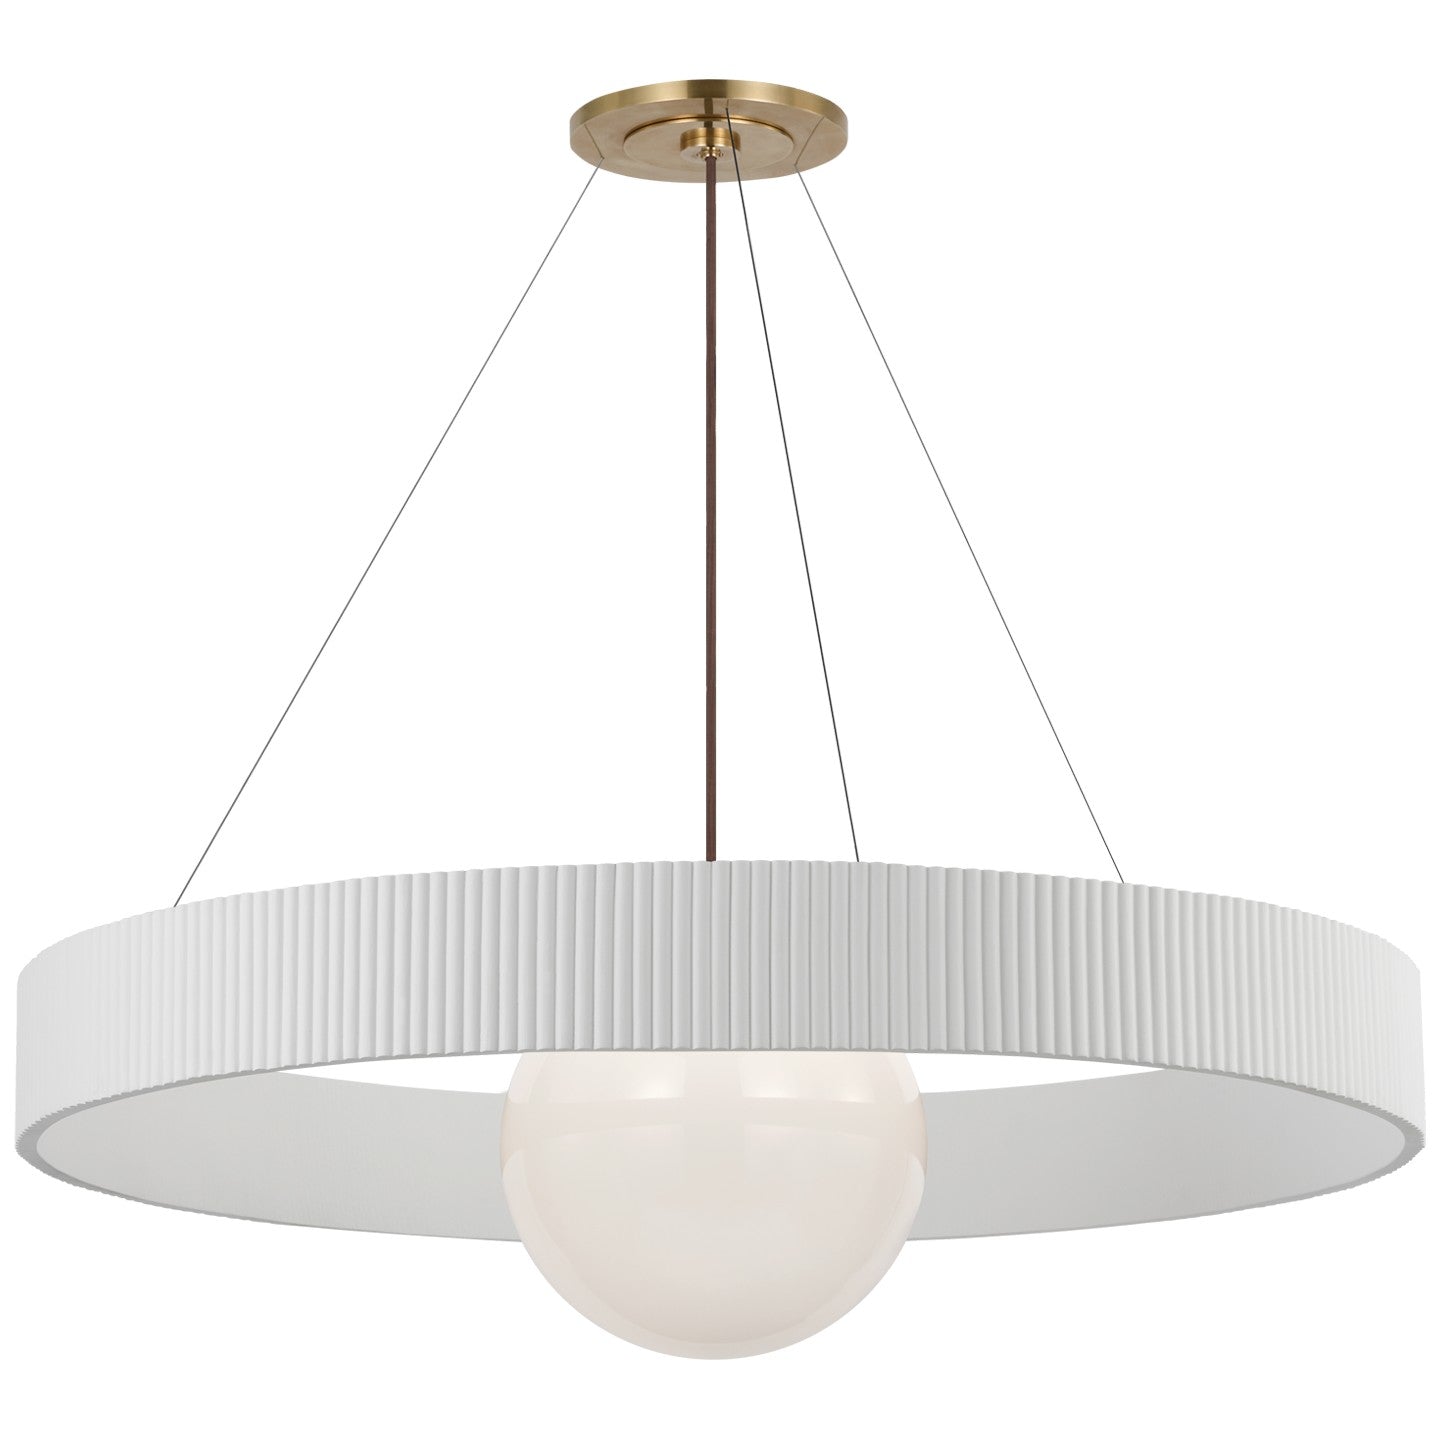 Visual Comfort Signature - WS 5001HAB/WHT-WG - LED Chandelier - Arena - Hand-Rubbed Antique Brass and White Glass